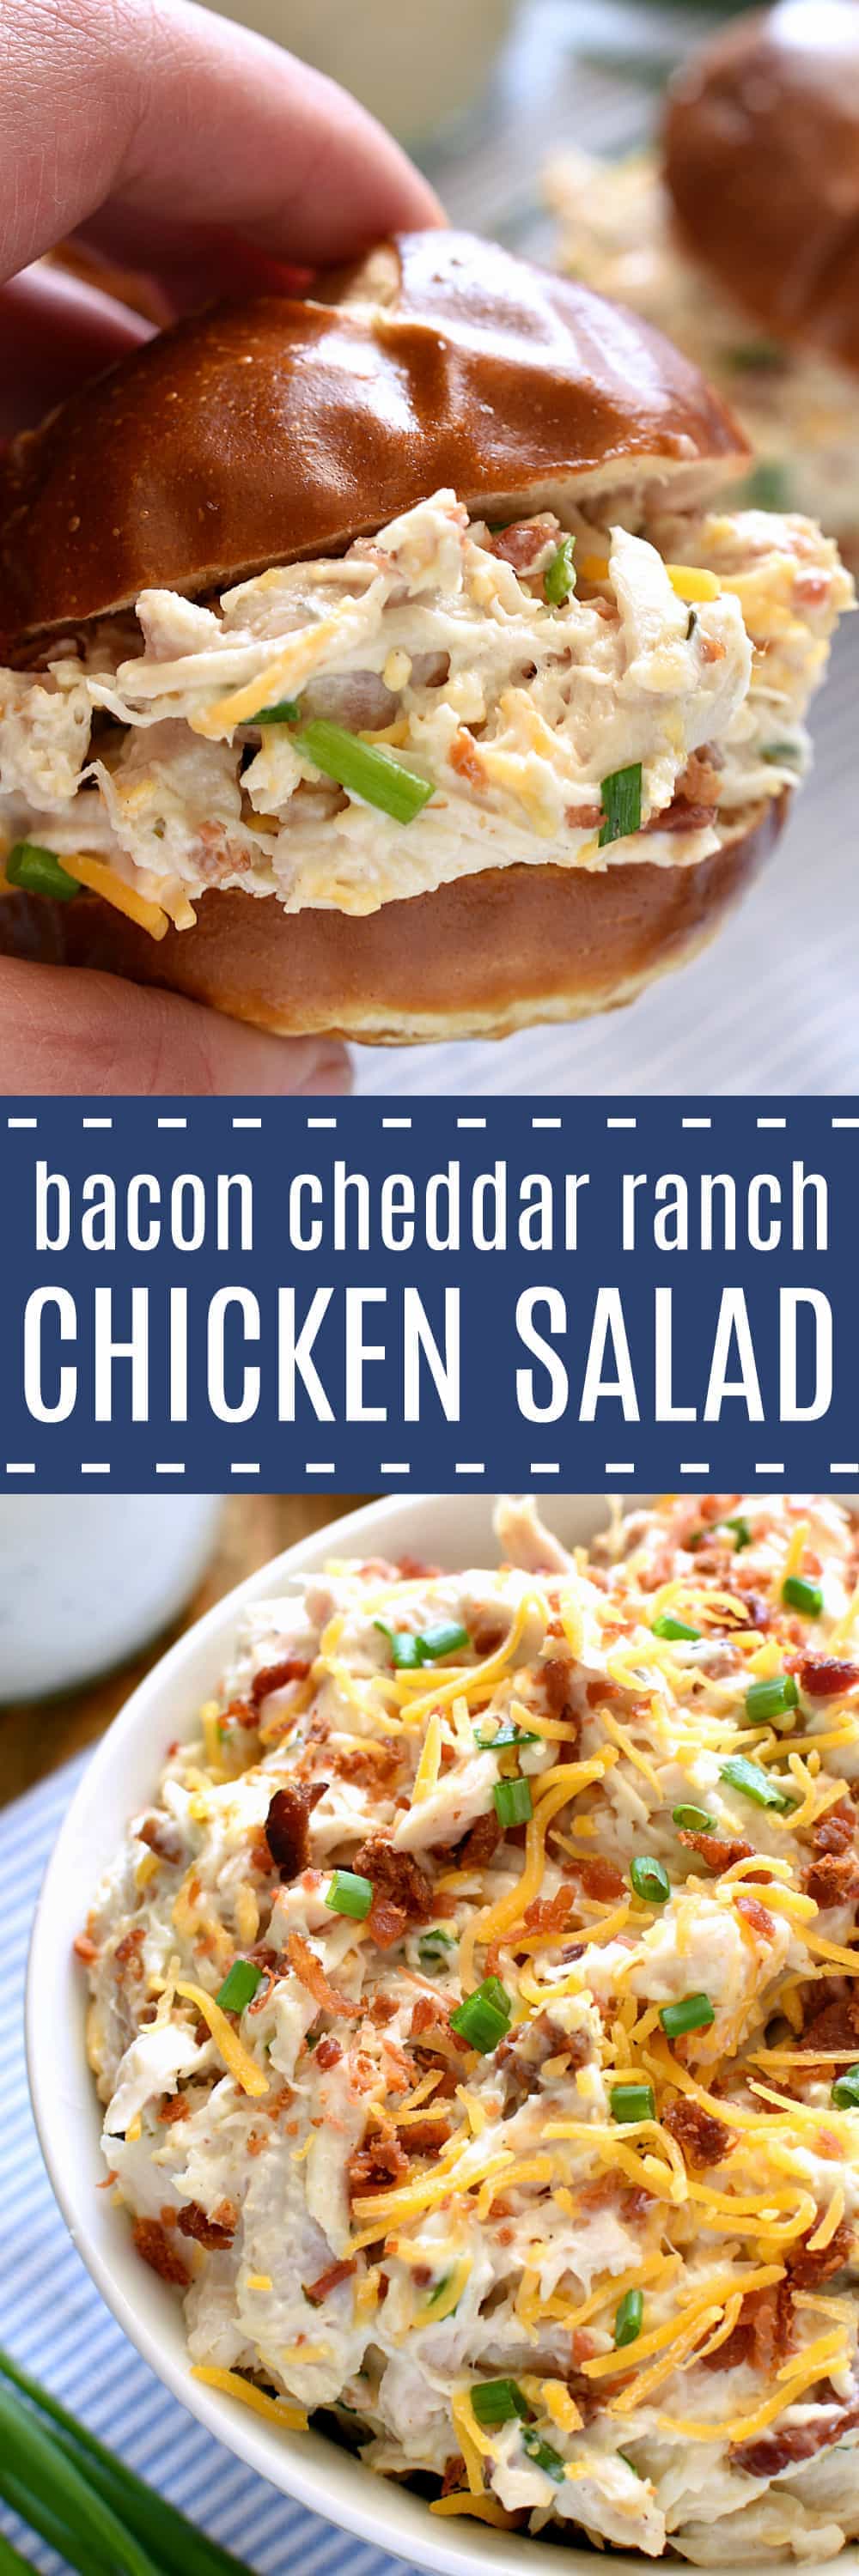 This Bacon Cheddar Ranch Chicken Salad is packed with all the BEST flavors! Chicken, bacon, cheddar, cheese, and ranch dressing come together in the most delicious way in this chicken salad that's guaranteed to become a favorite!